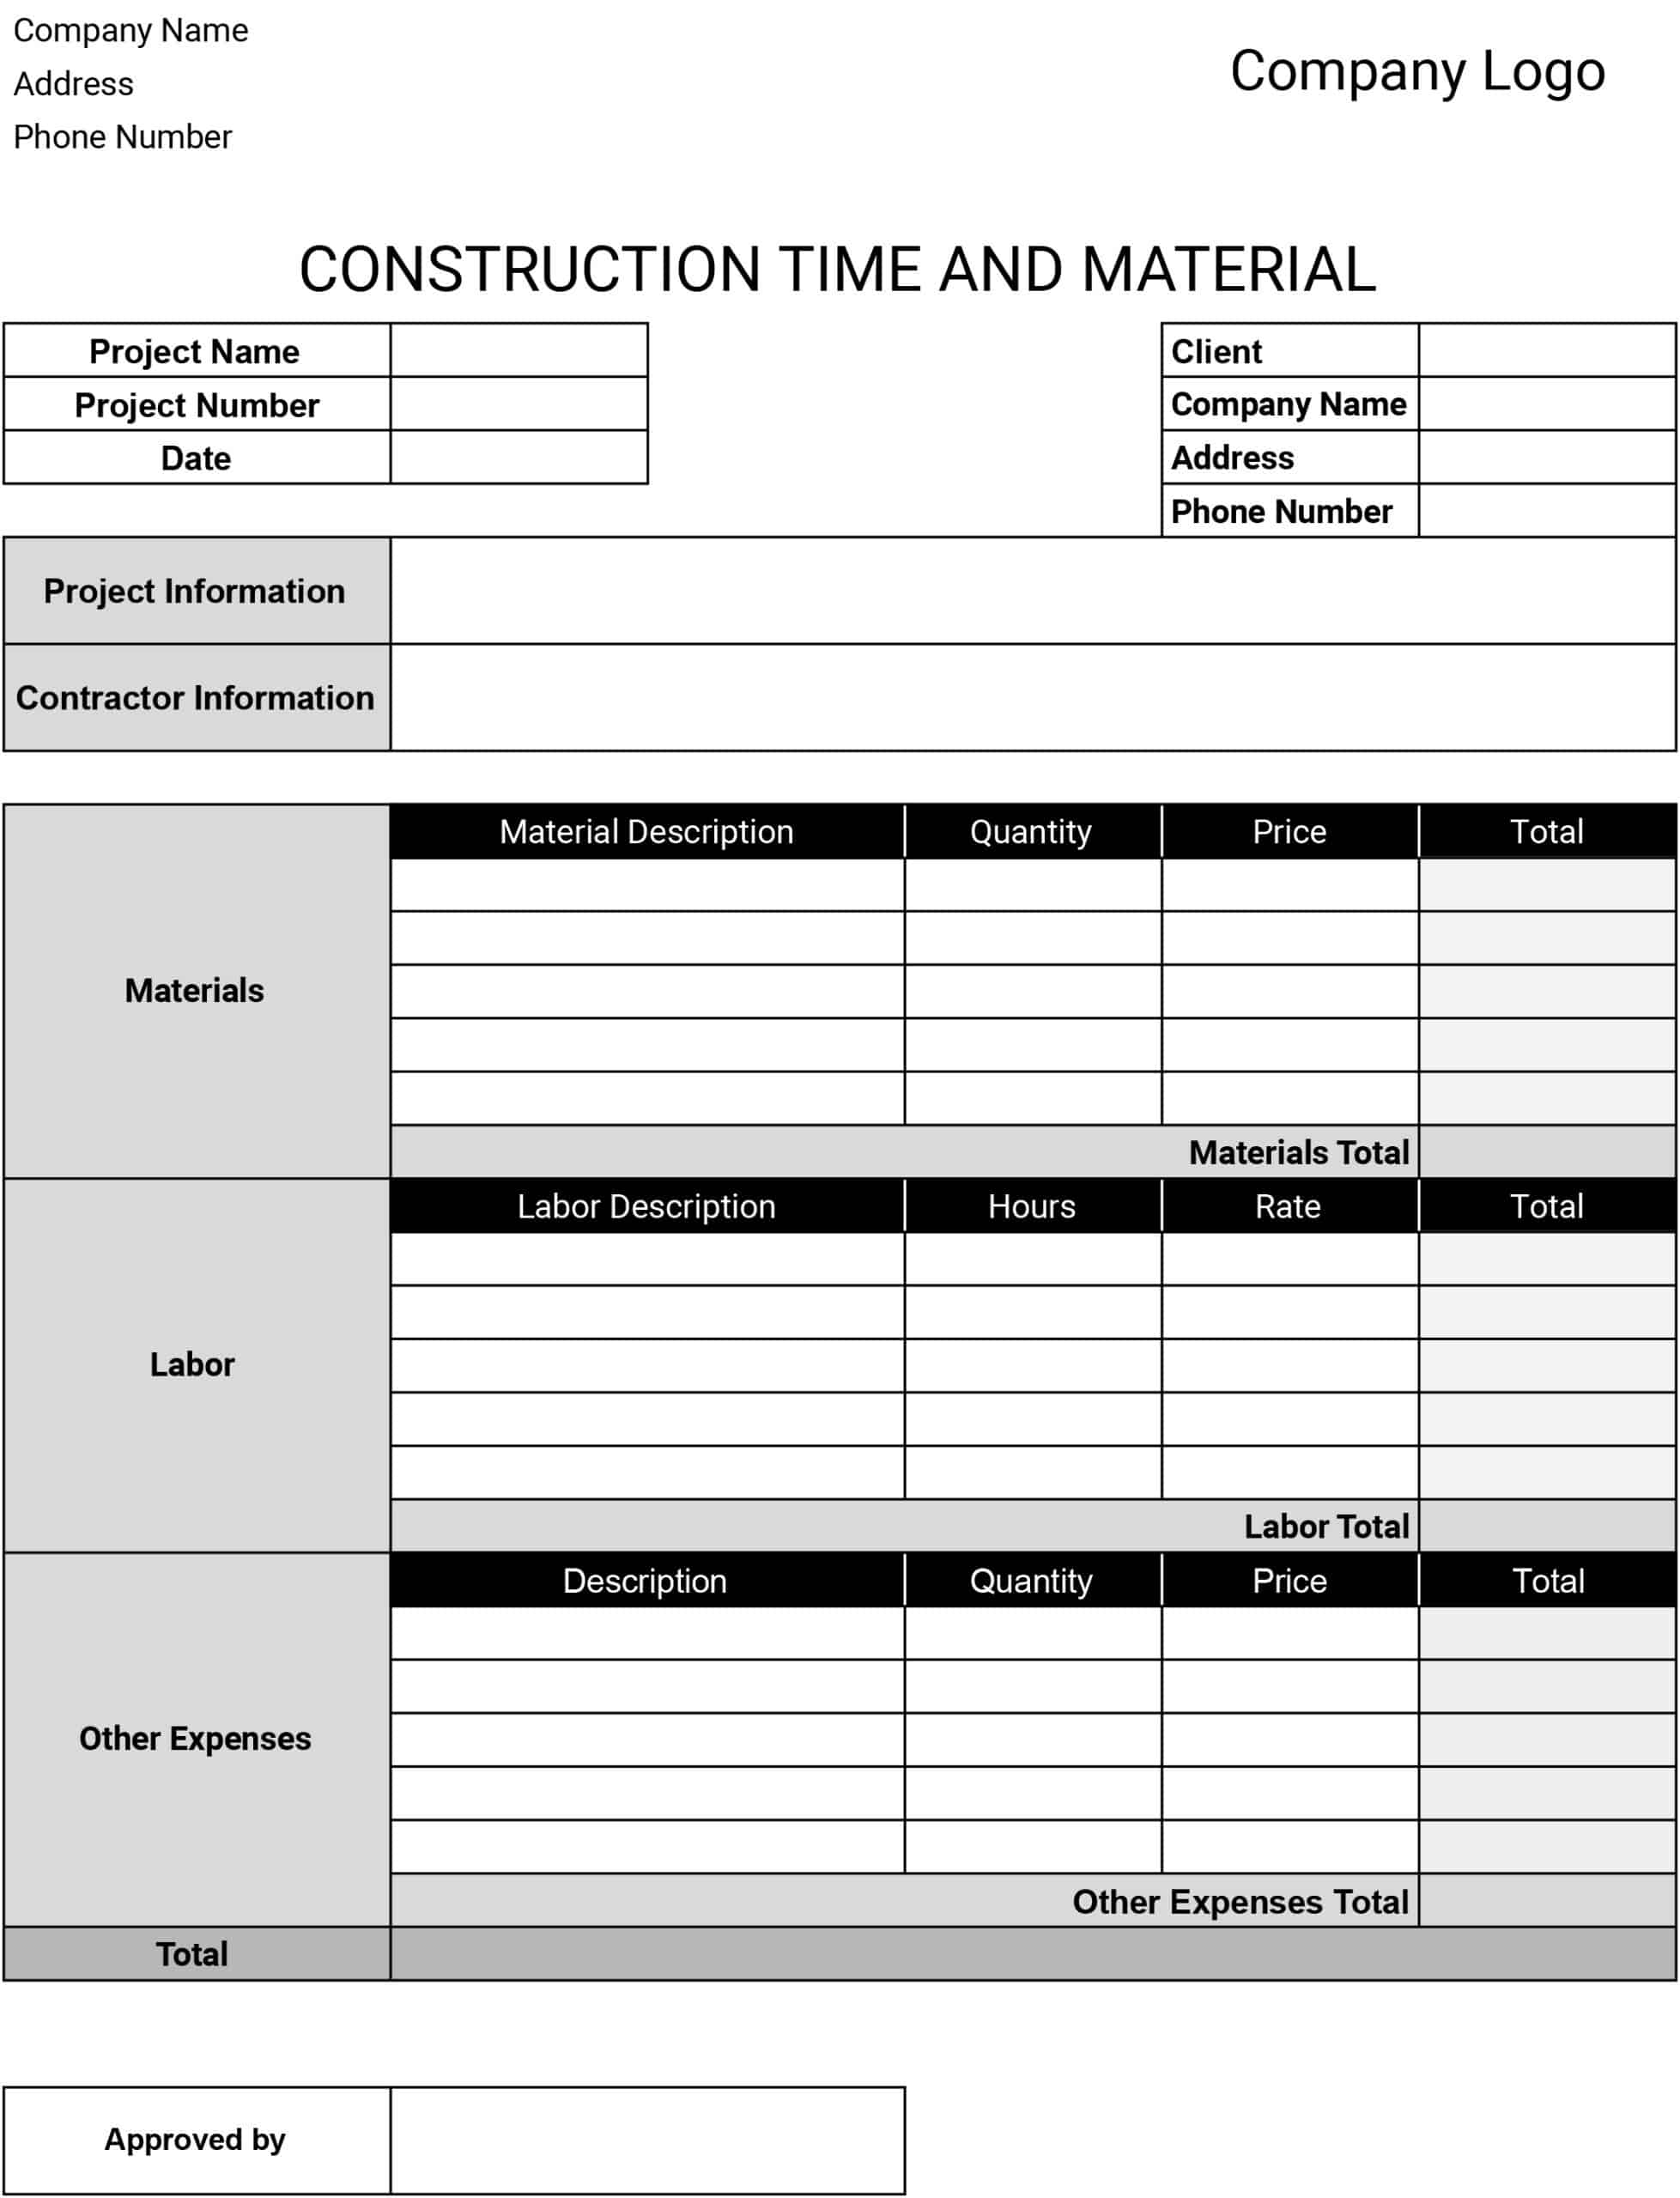 Time and Material Template for Construction